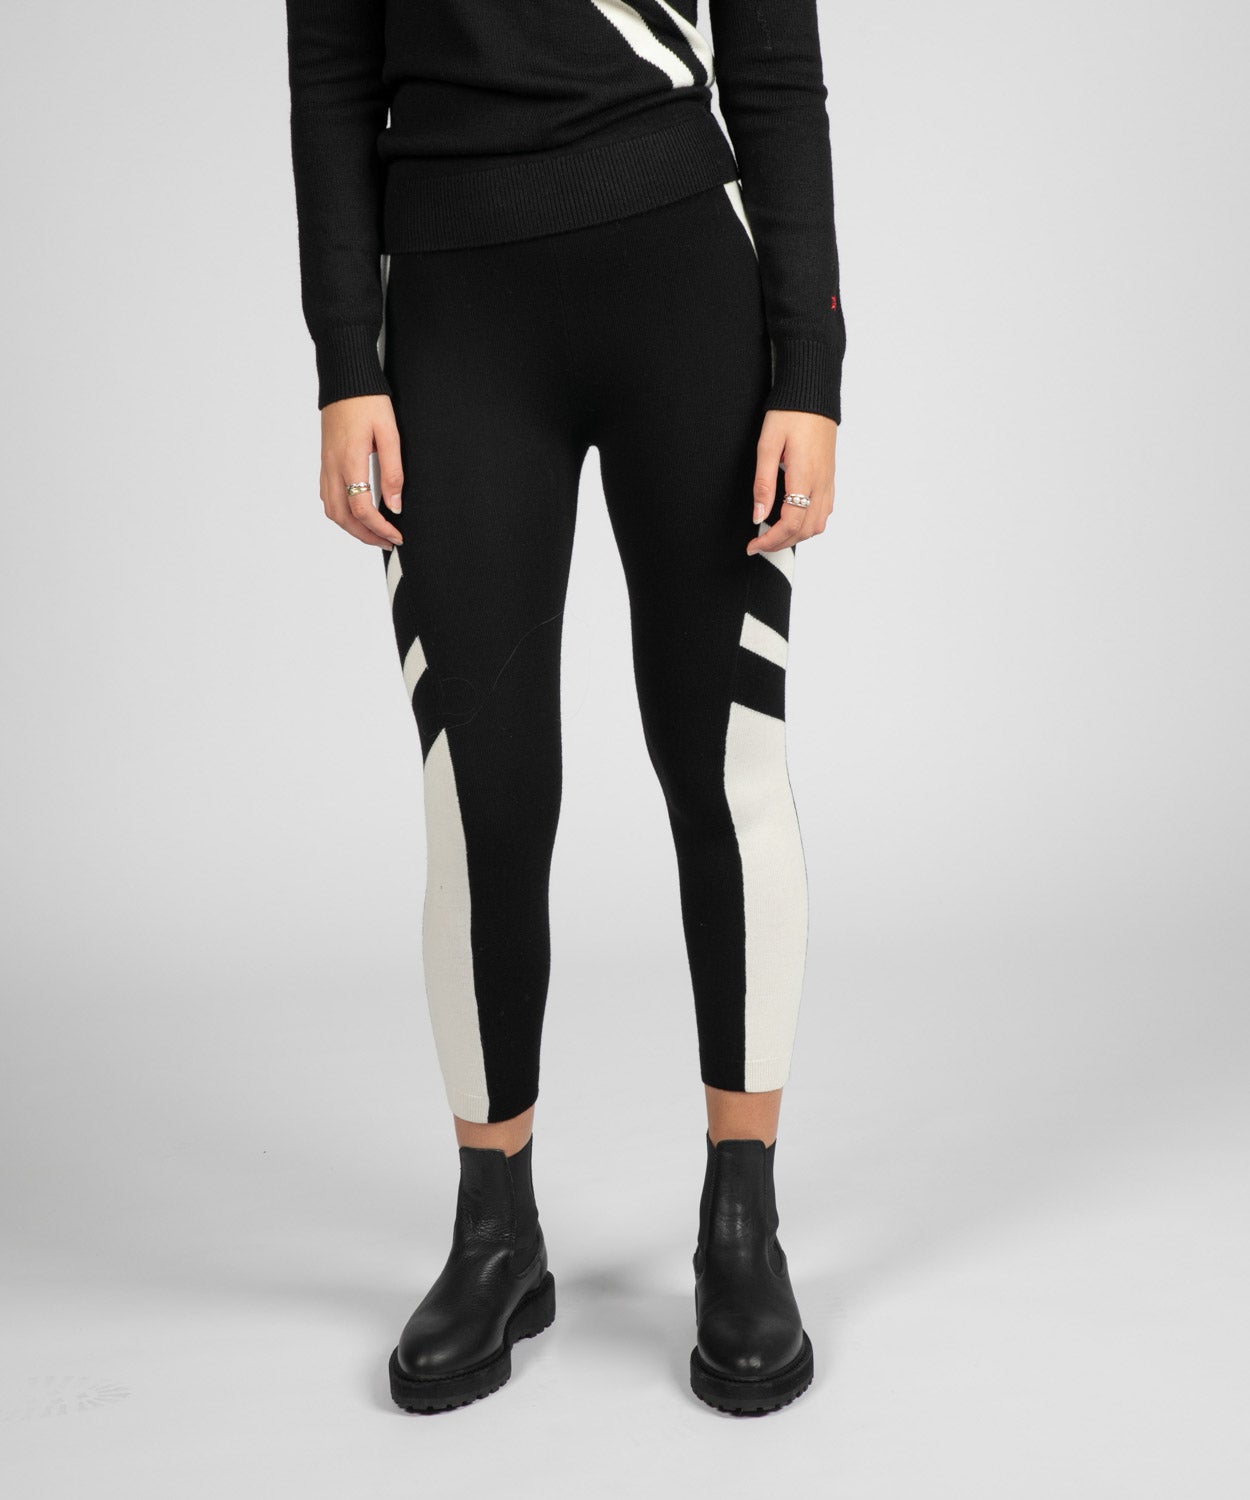 Women's Mania Bottom Base Layers | Thermals Perfect Moment Black XS 